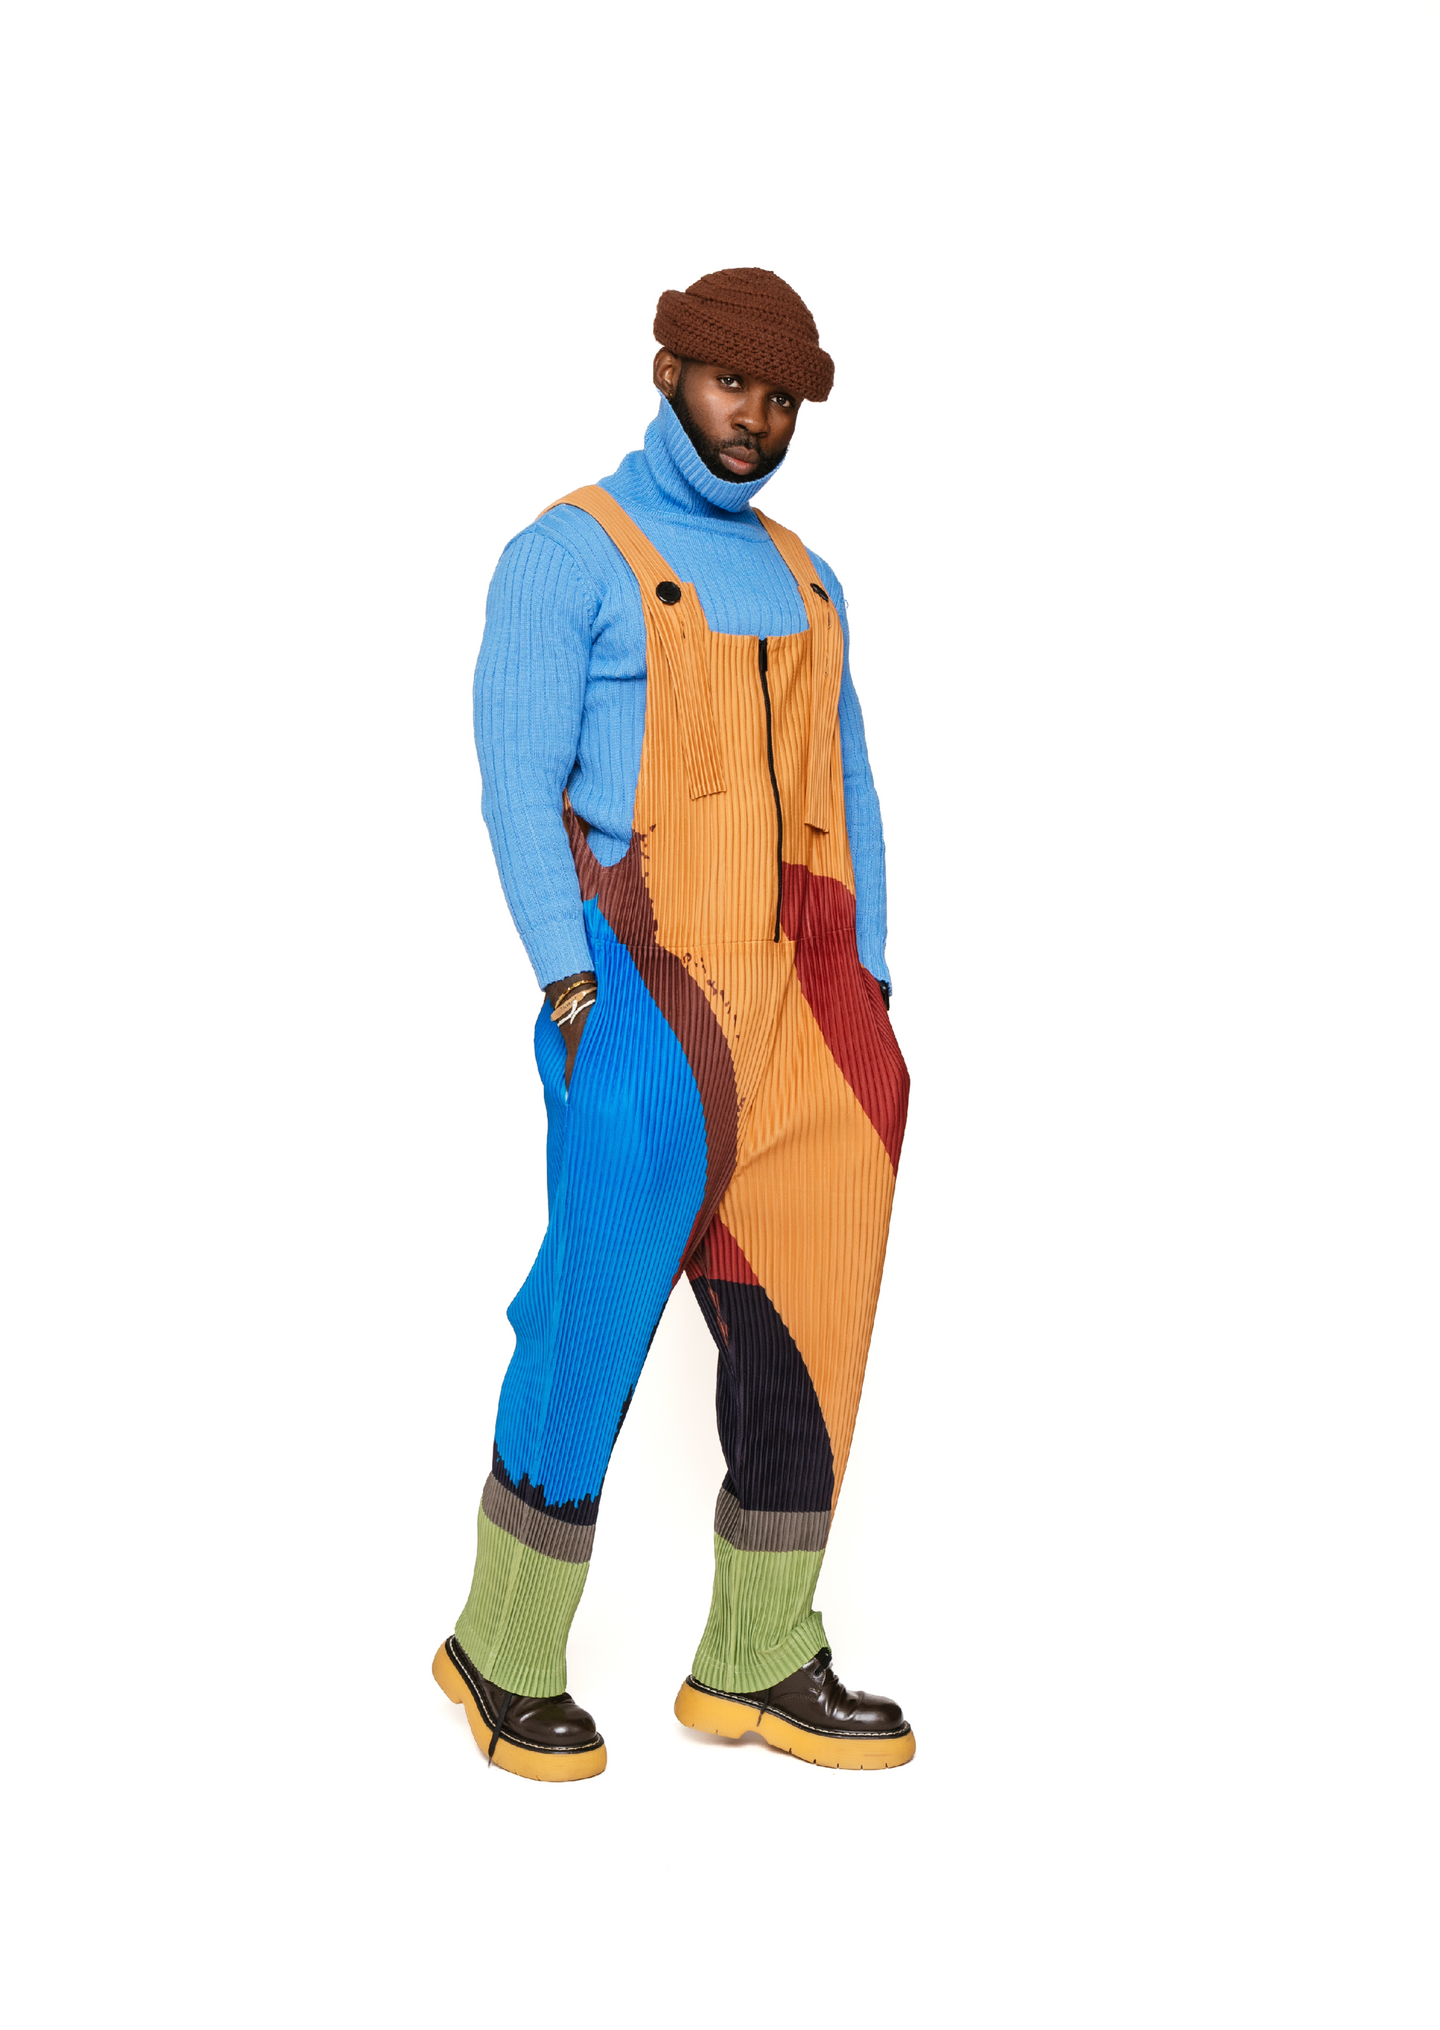 THE COLOR BLOCK EXCLUSIVE OVERALL ONLY 30 MADE